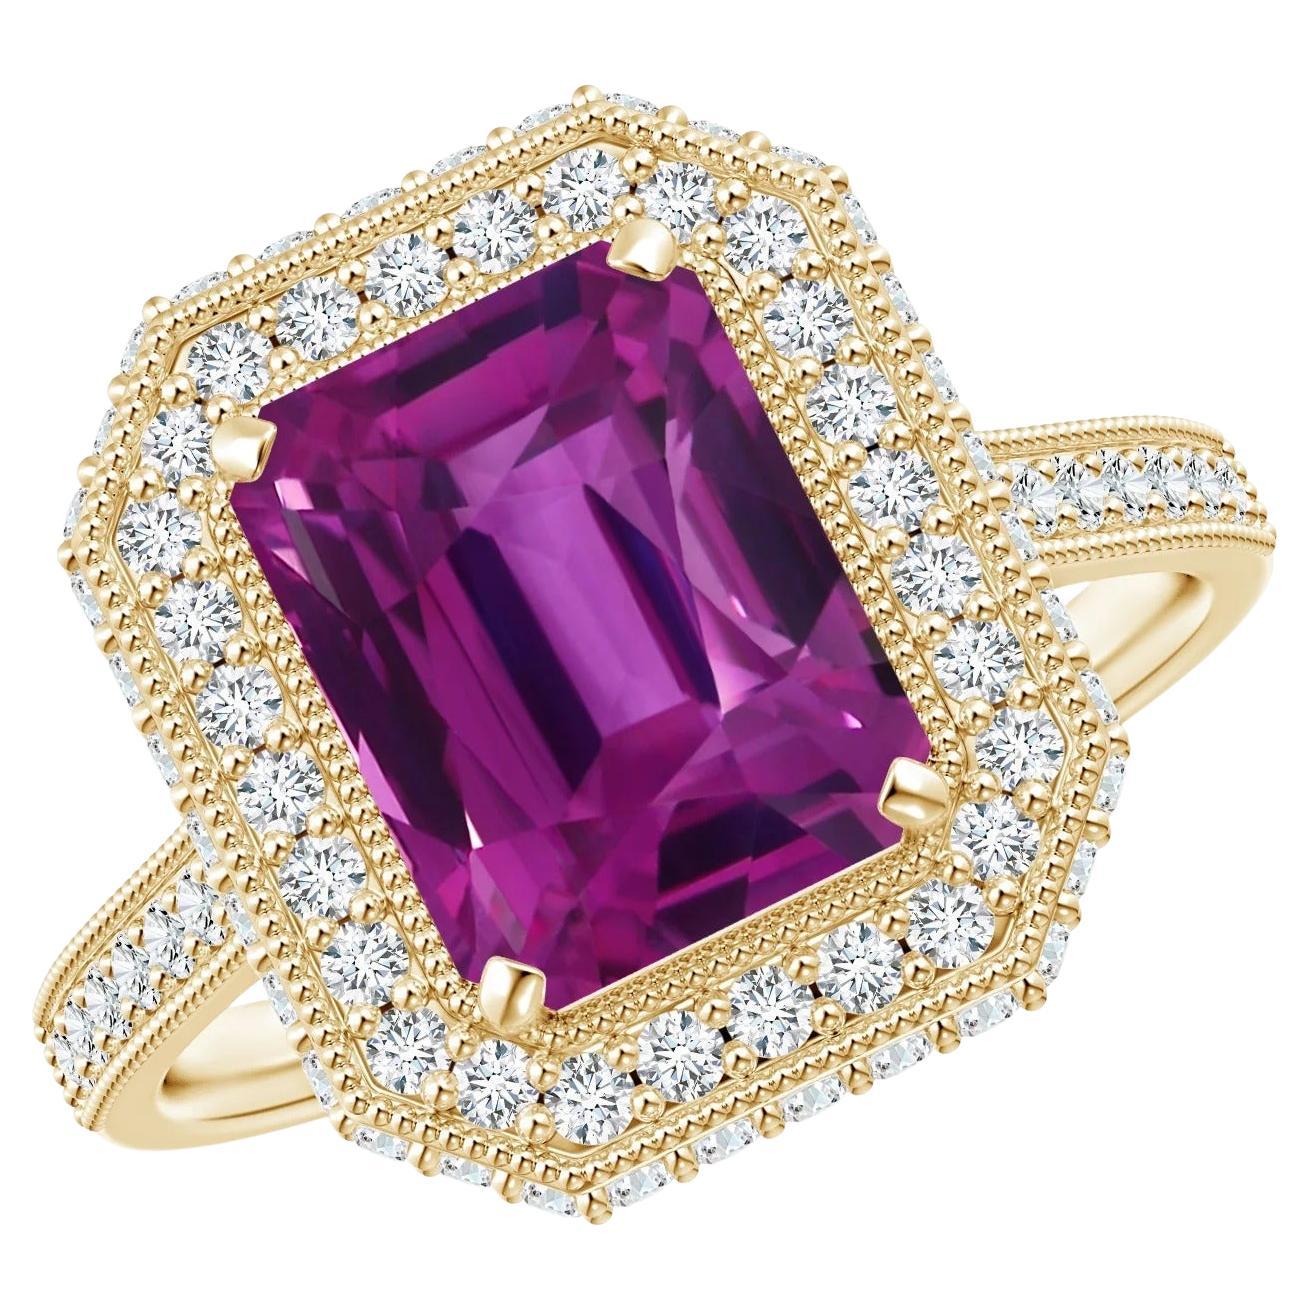 For Sale:  GIA Certified Natural Emerald Cut Pink Sapphire Halo Ring in Yellow Gold